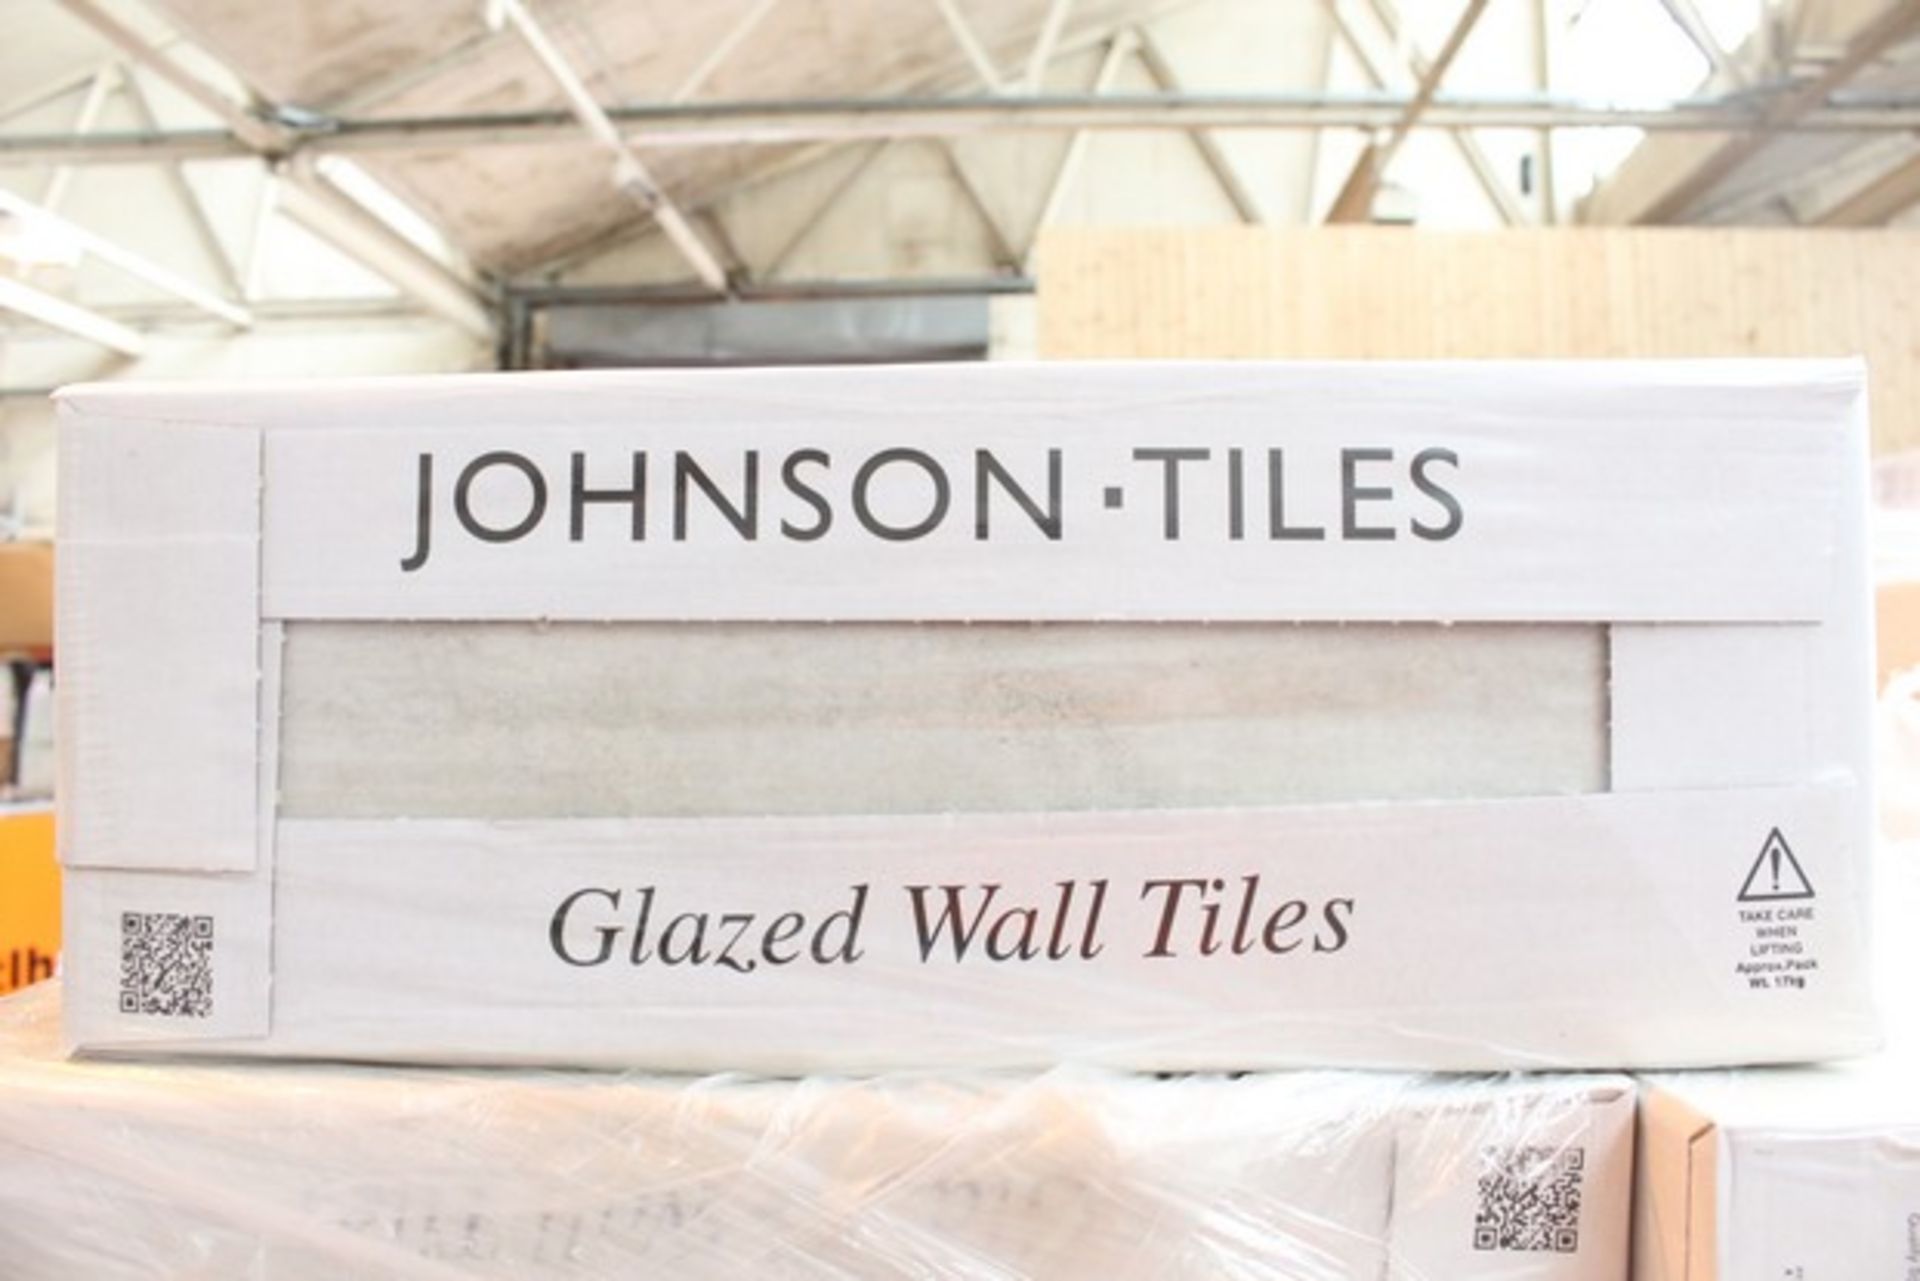 60X FACTORY SEALED BY JOHNSON TILES GLAZED WALL TILES 400 X 150MM 17 PER PACK RRP £14.99 C0OMBINED - Image 2 of 2